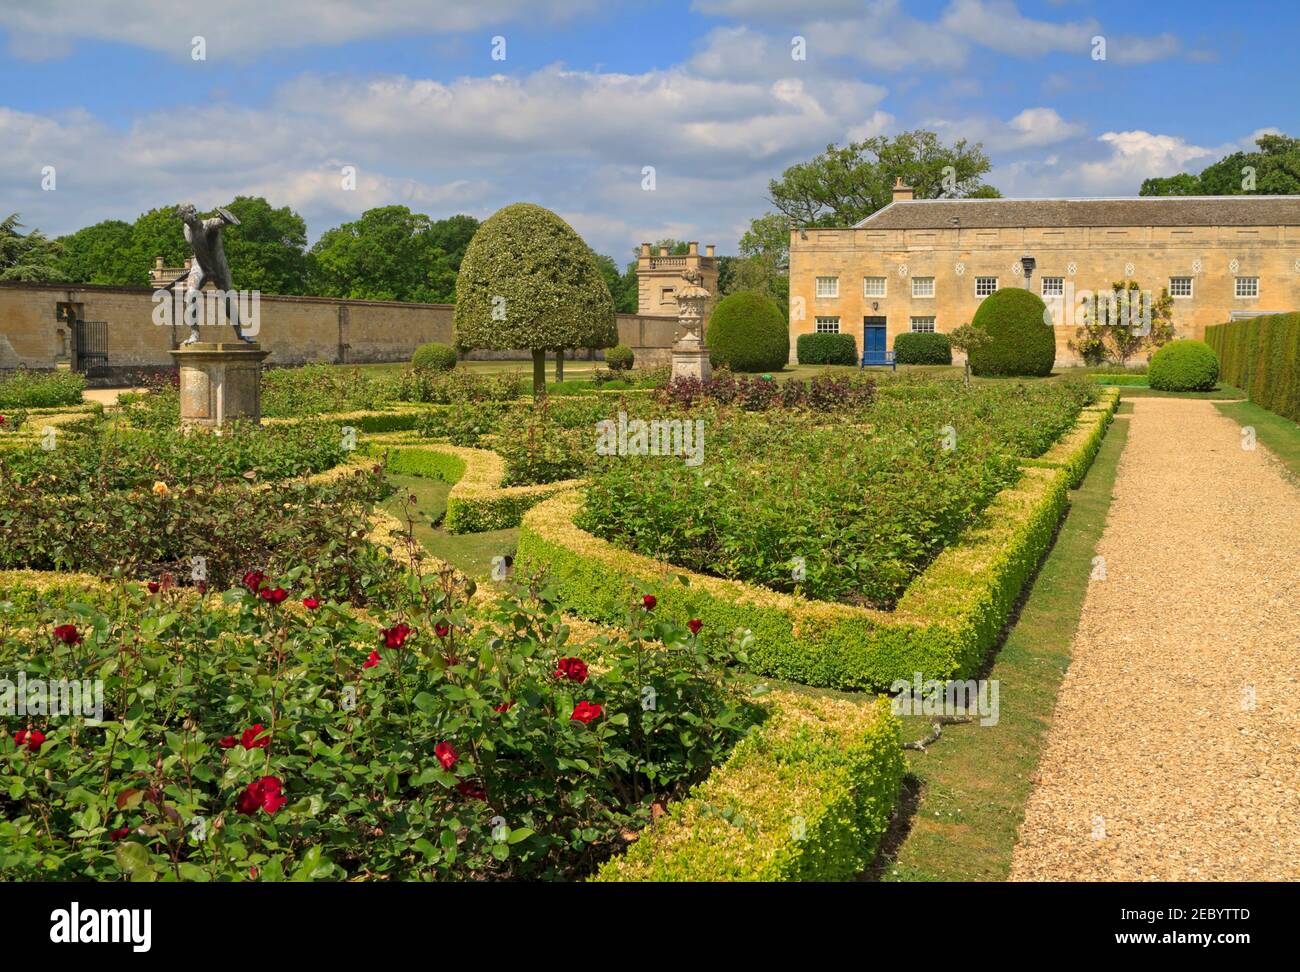 Grimsthorpe Castle, Bourne, Lincolnshire. Rose parterre garden with formal box hedges and statue of a gladiator. Stock Photo